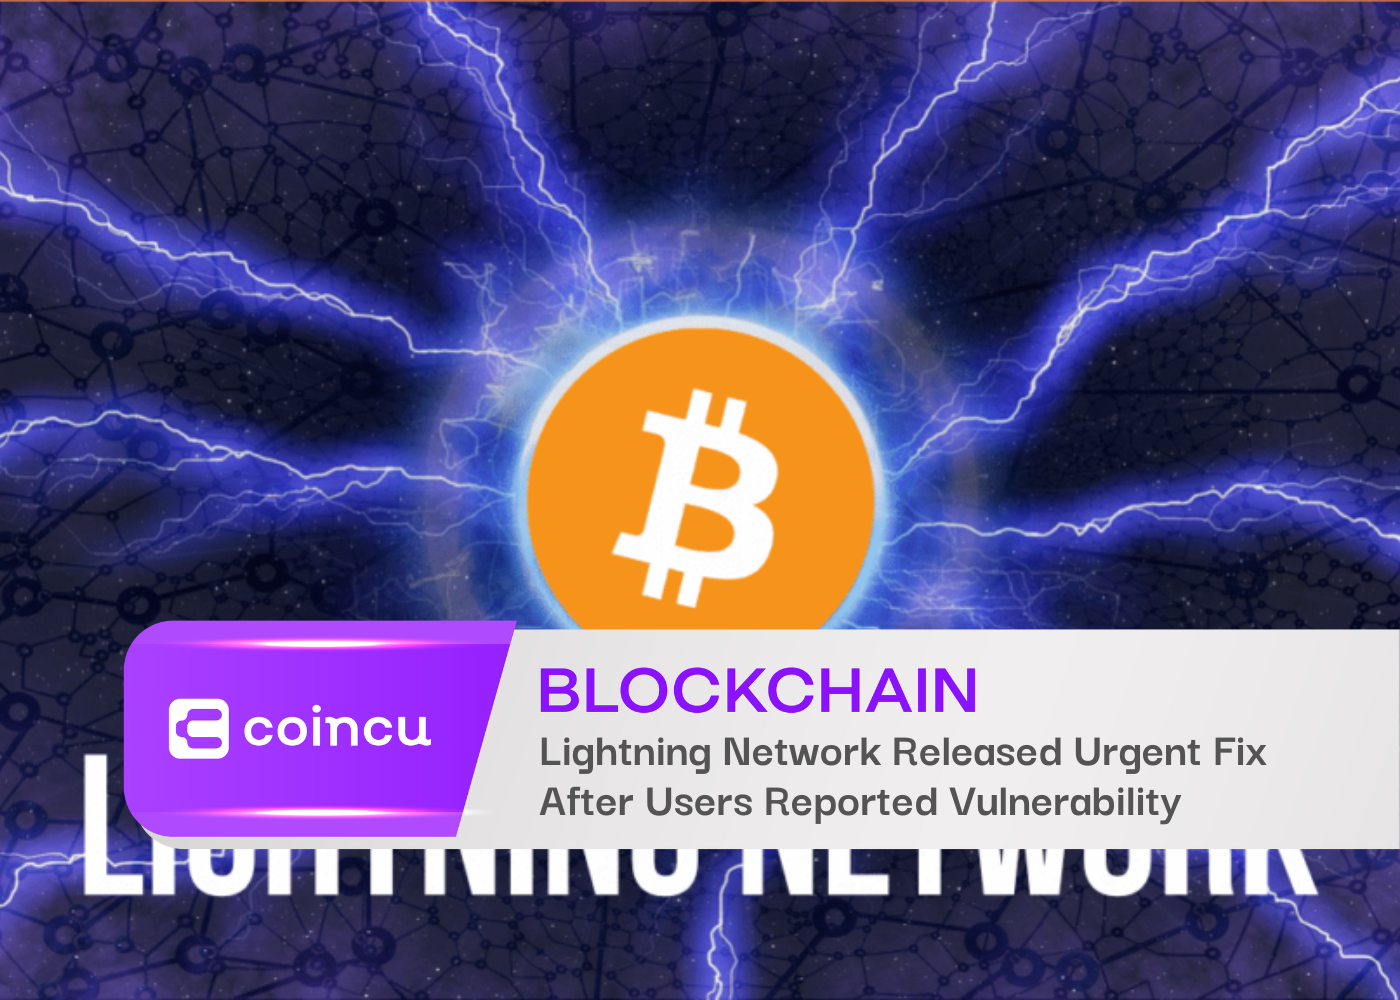 Lightning Network Released Urgent Fix After Users Reported Vulnerability